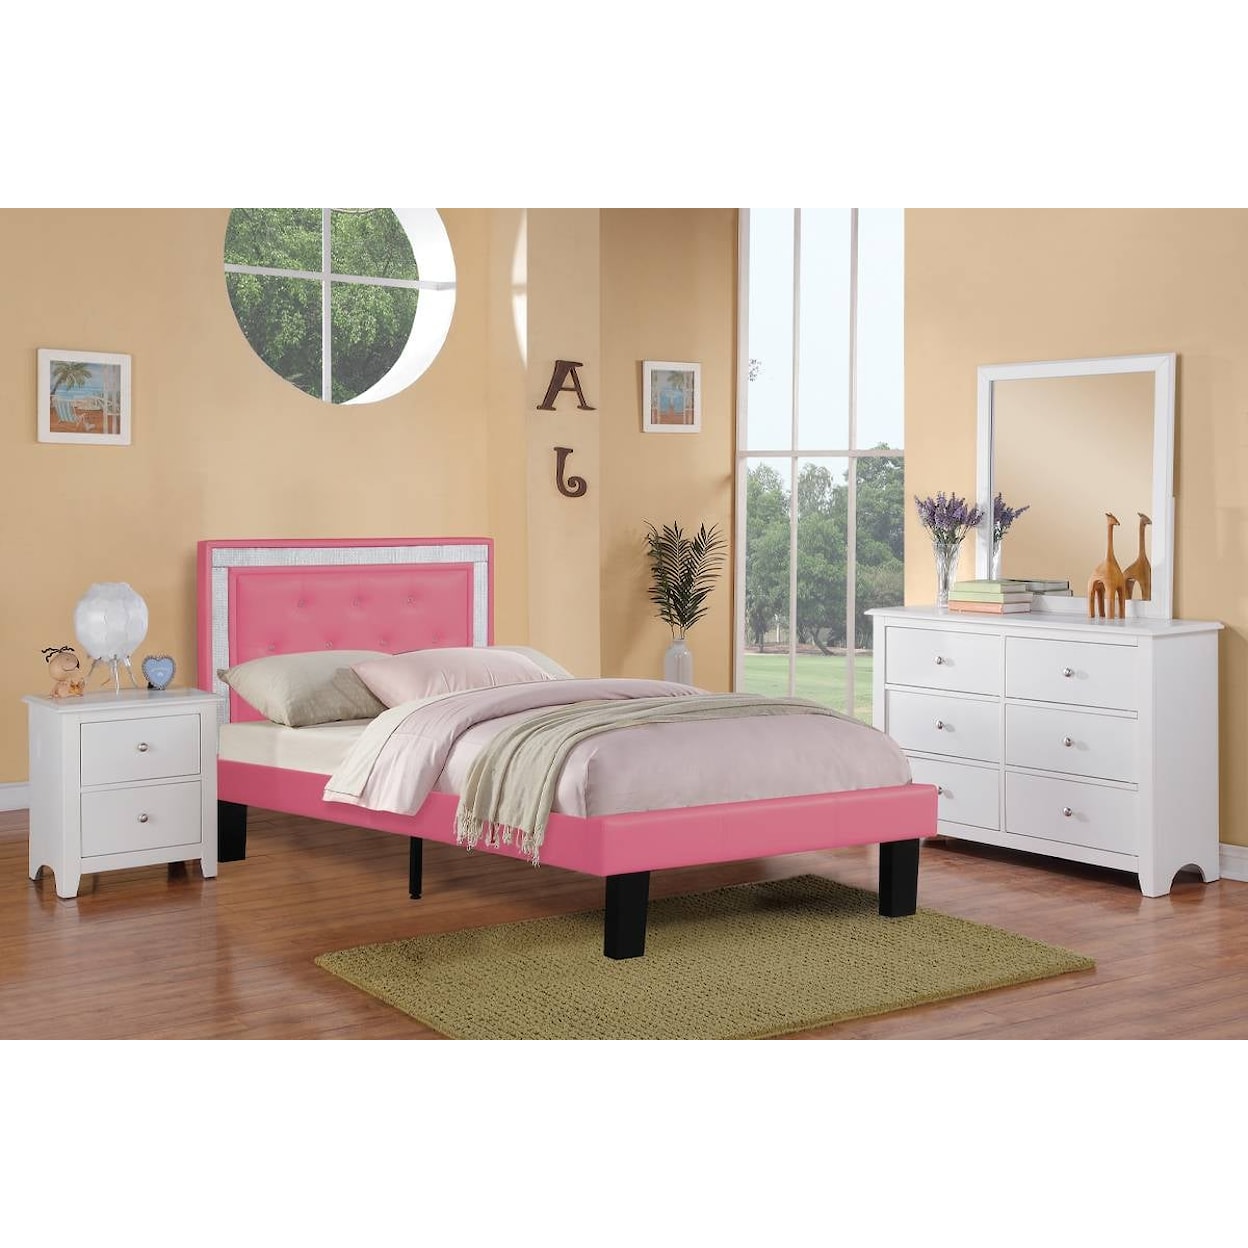 Poundex Bejeweled BEJEWLED PINK TWIN BED |